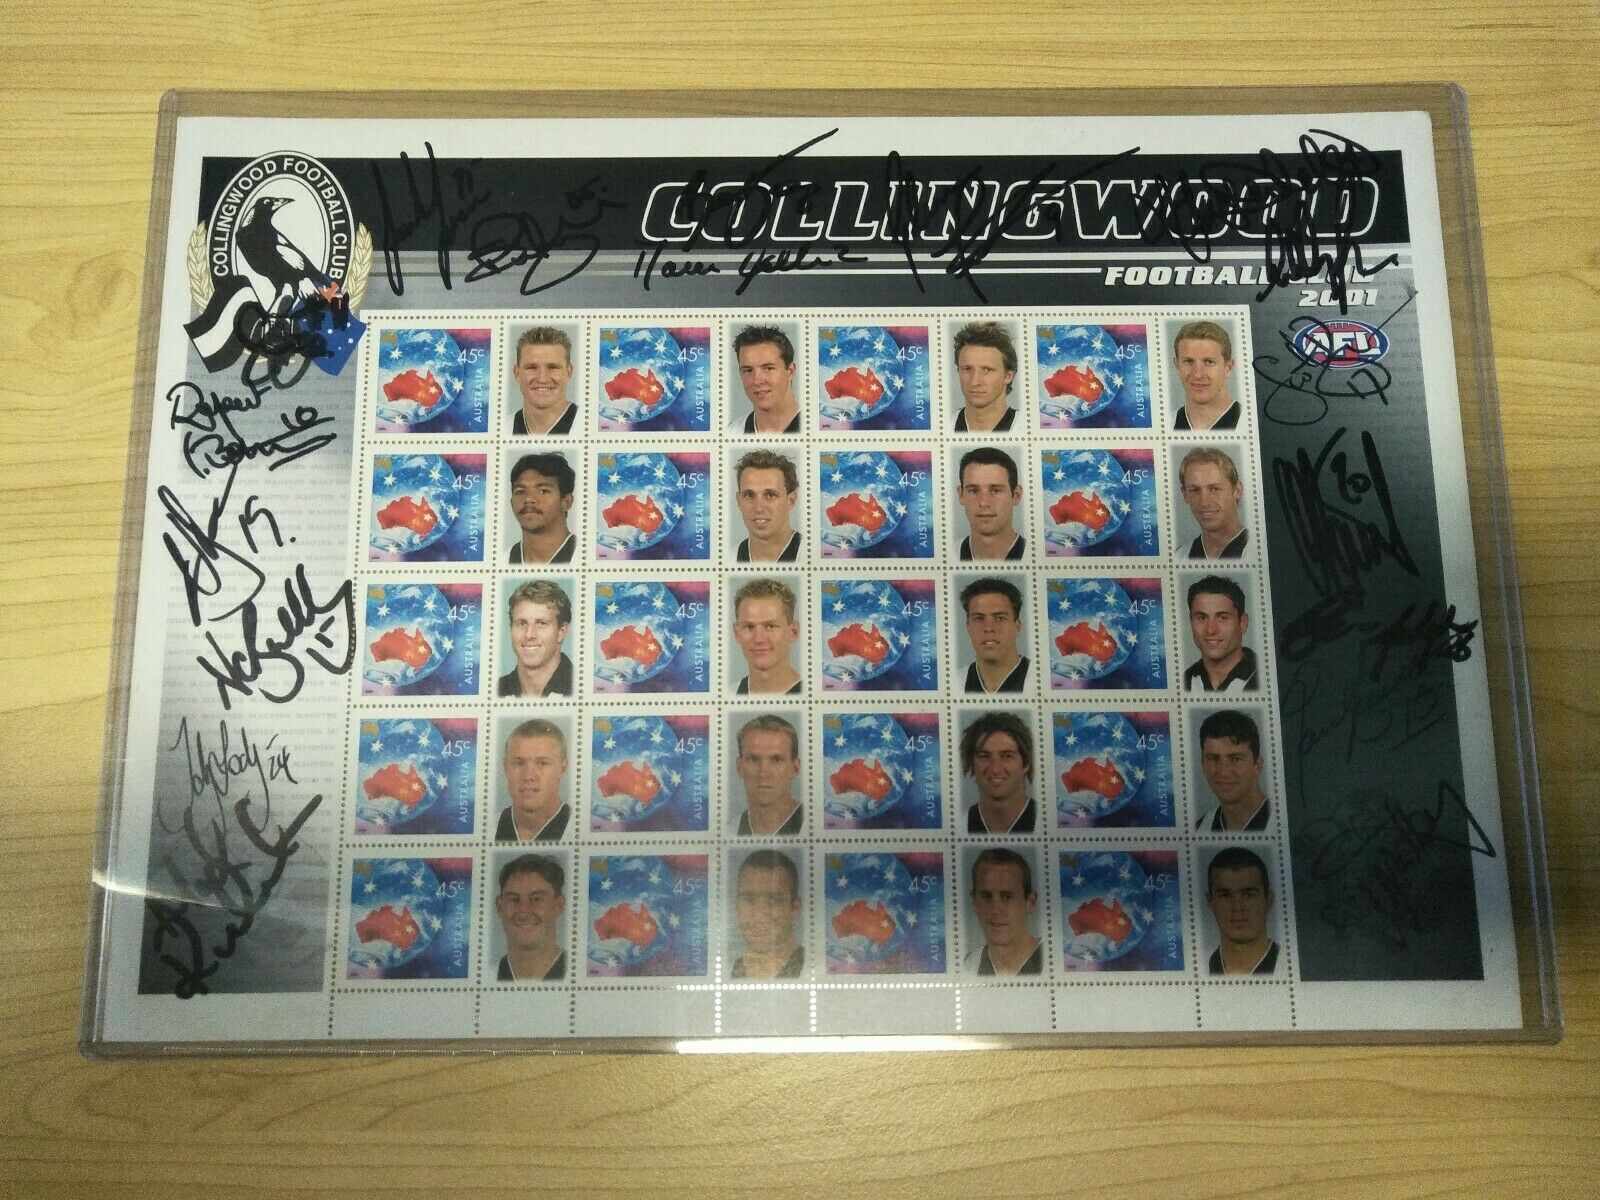 Collingwood Football Club Stamp Sheet Signed By 19 Players Inc Buckley, Presti